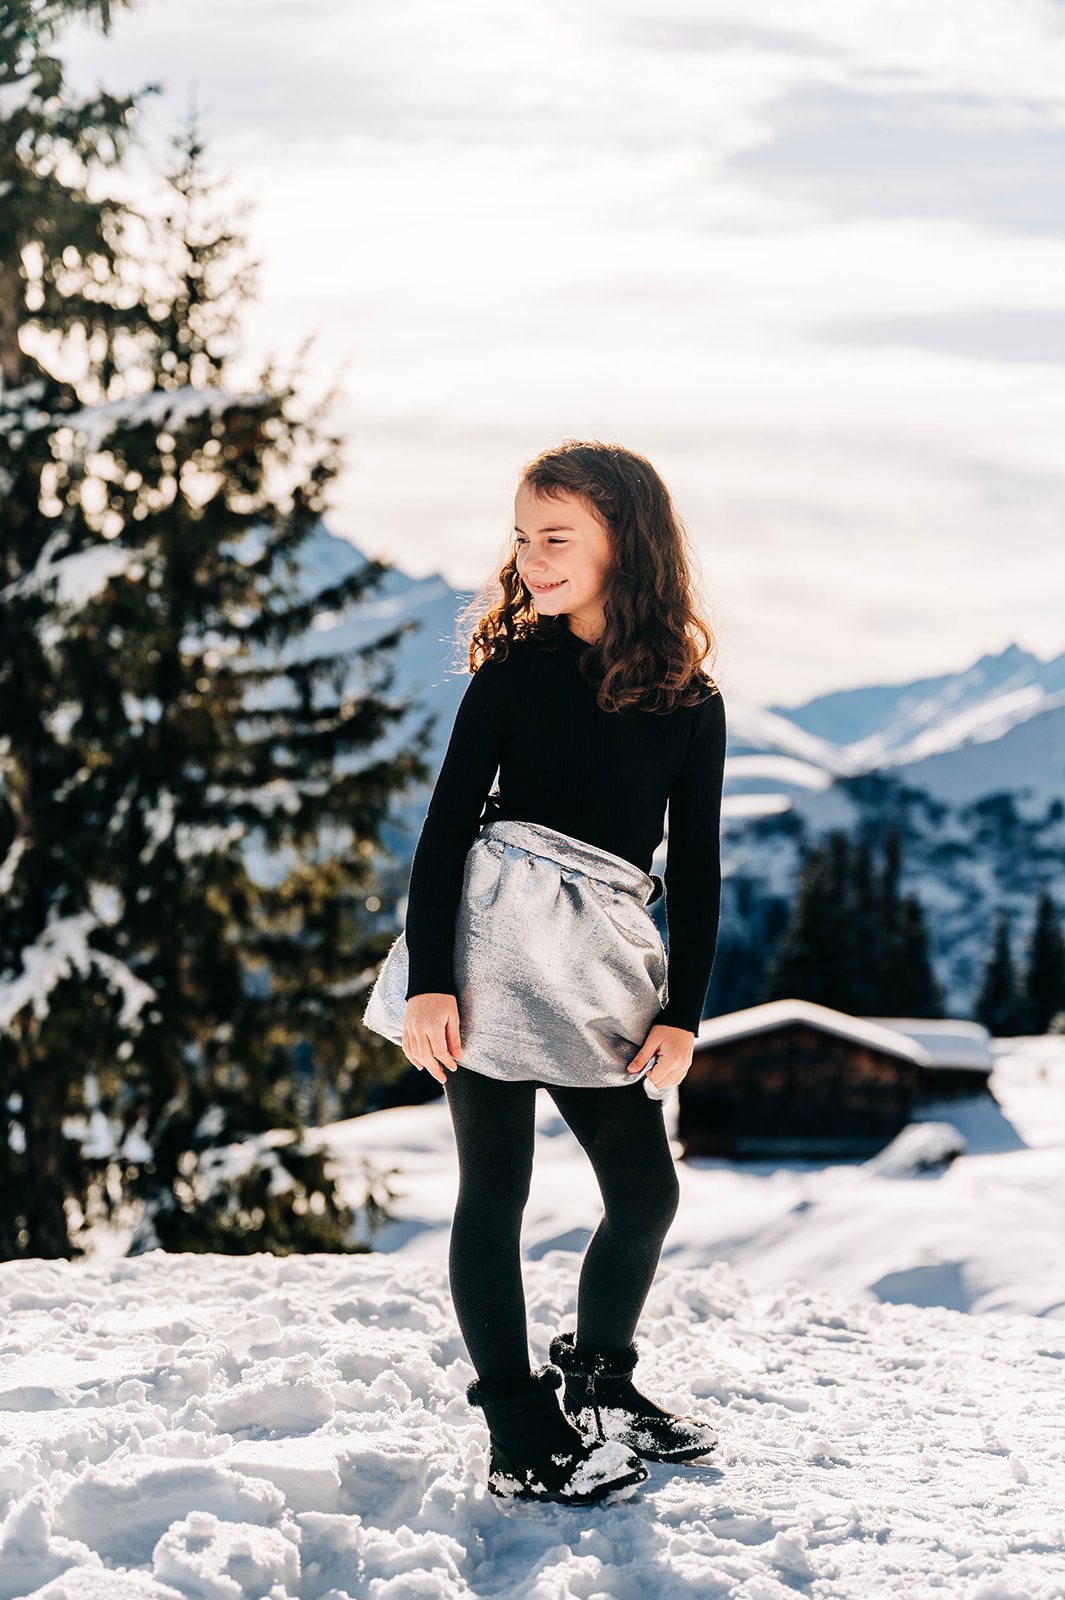 Young Girl Portrait in Snow Swiss Alps